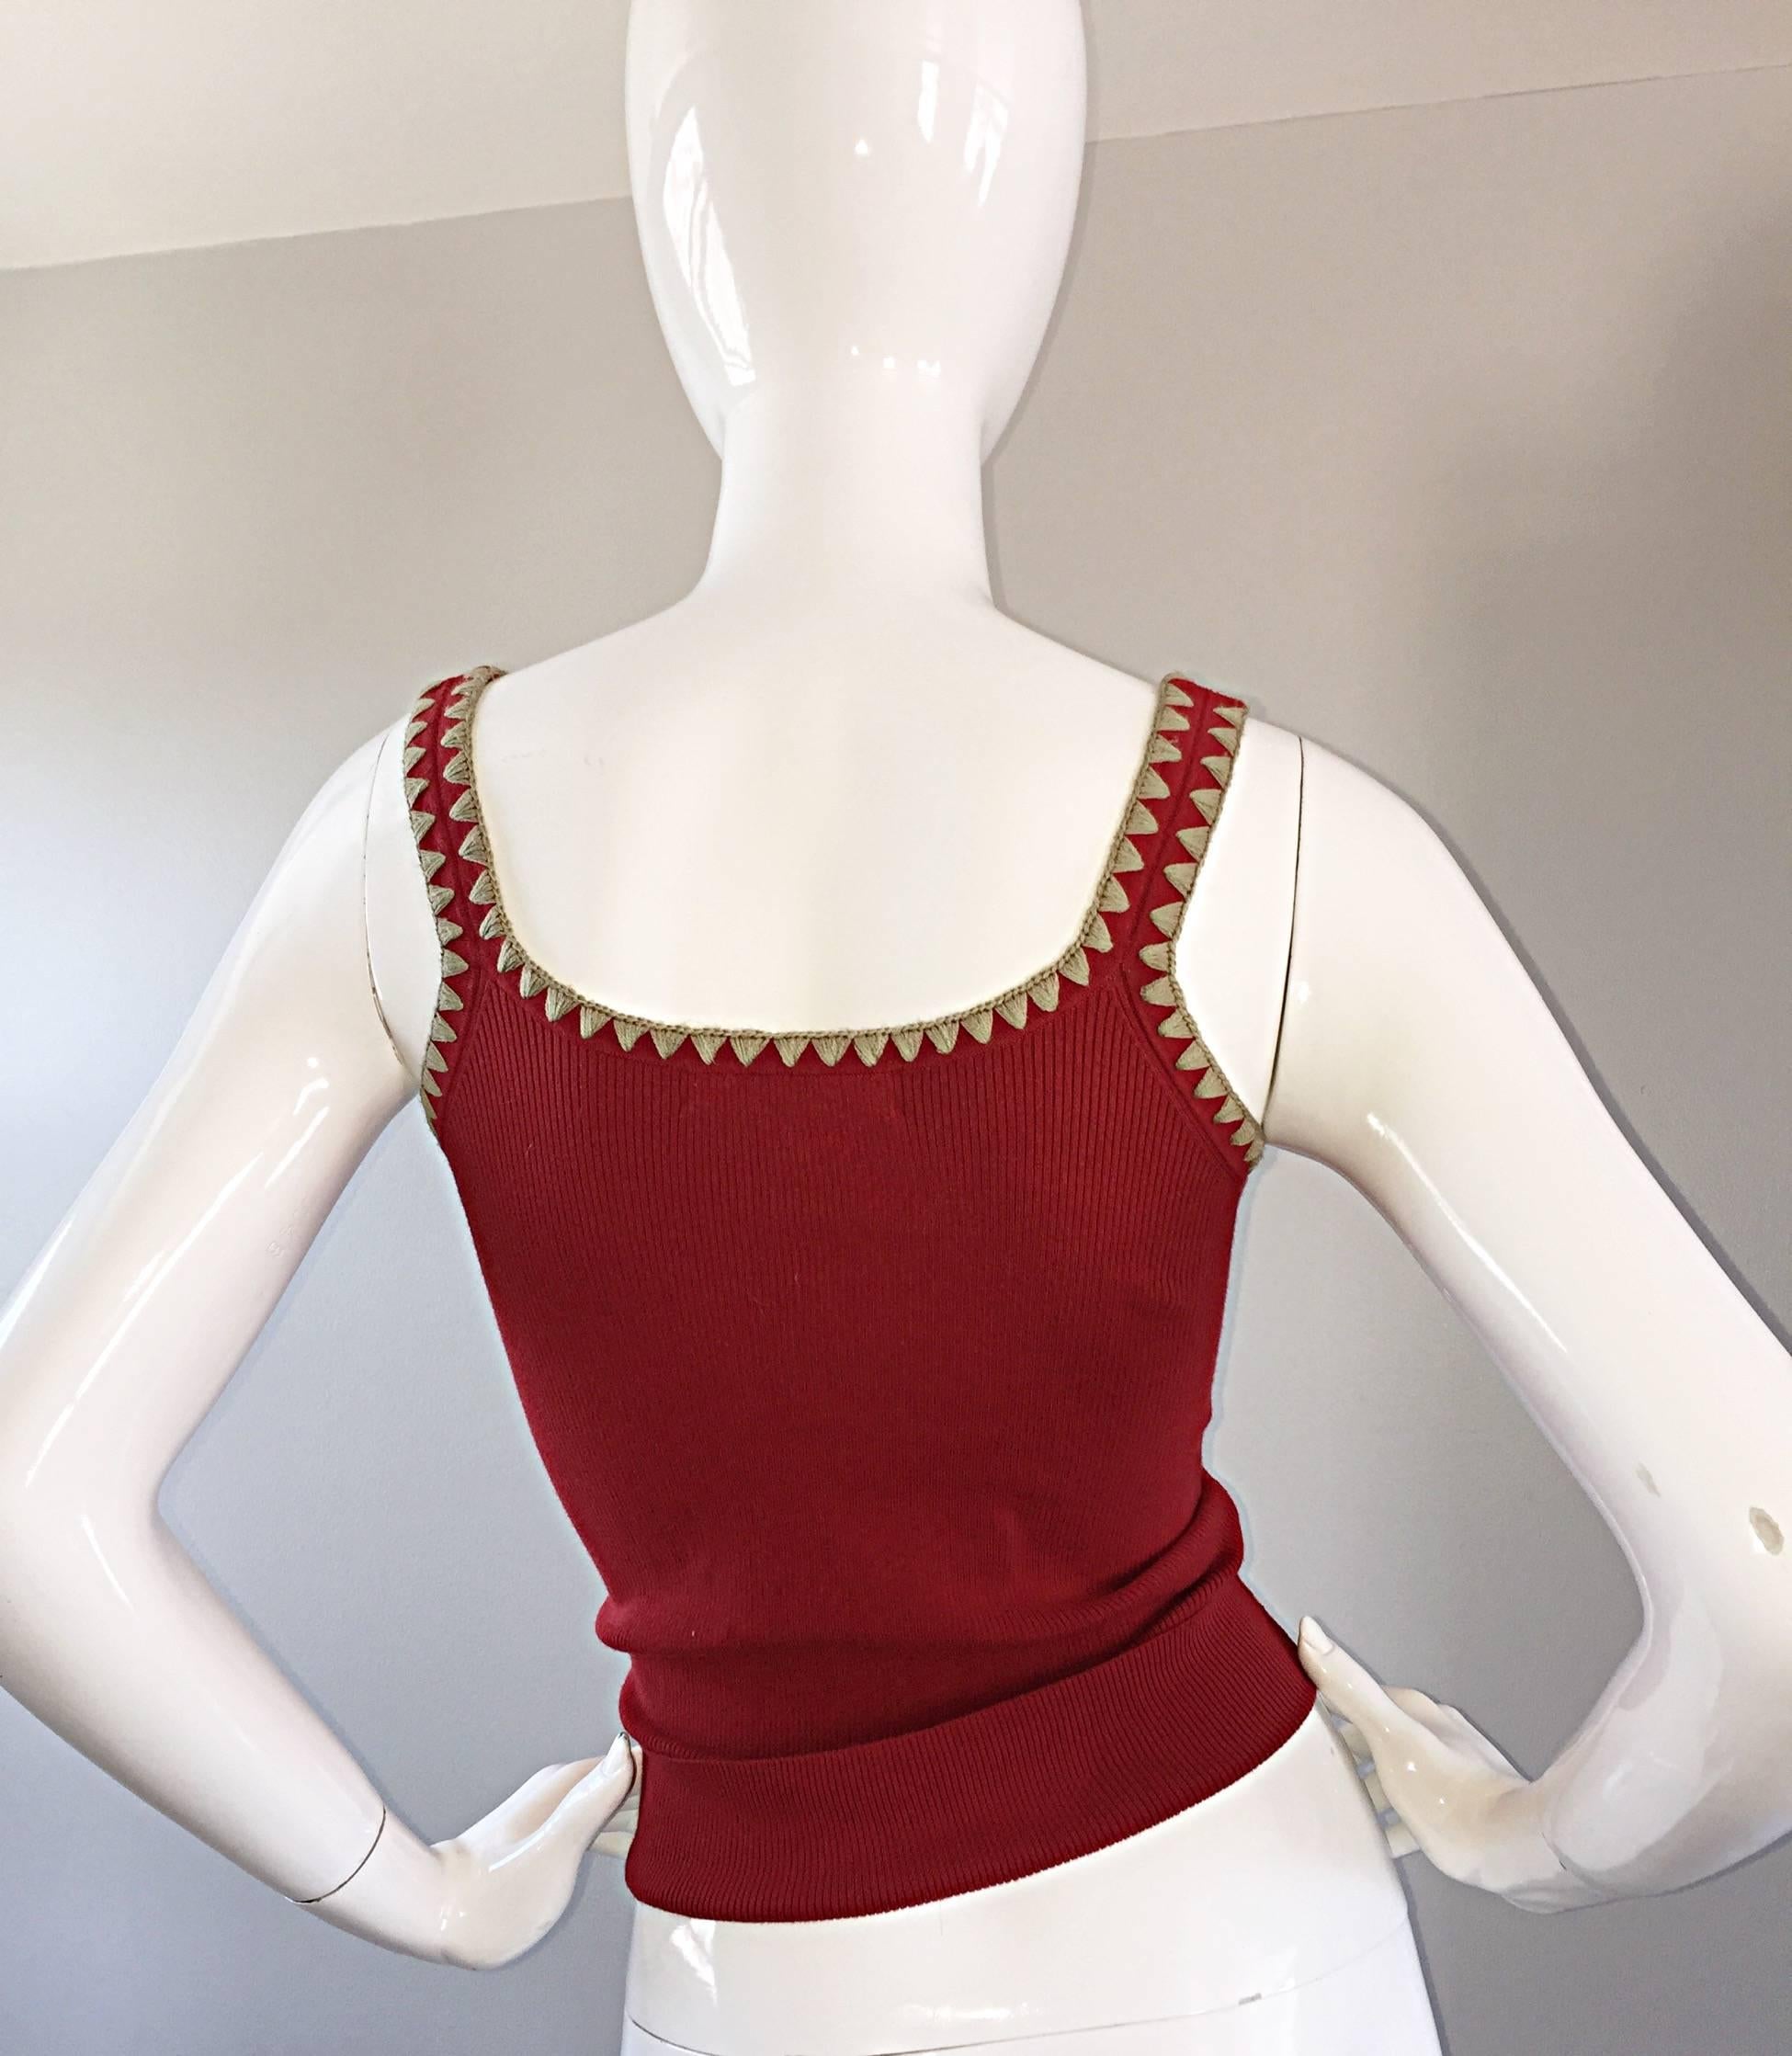 Michael Kors Collection Brick Red + Tan 1990s 90s Ribbed Crop Top 3